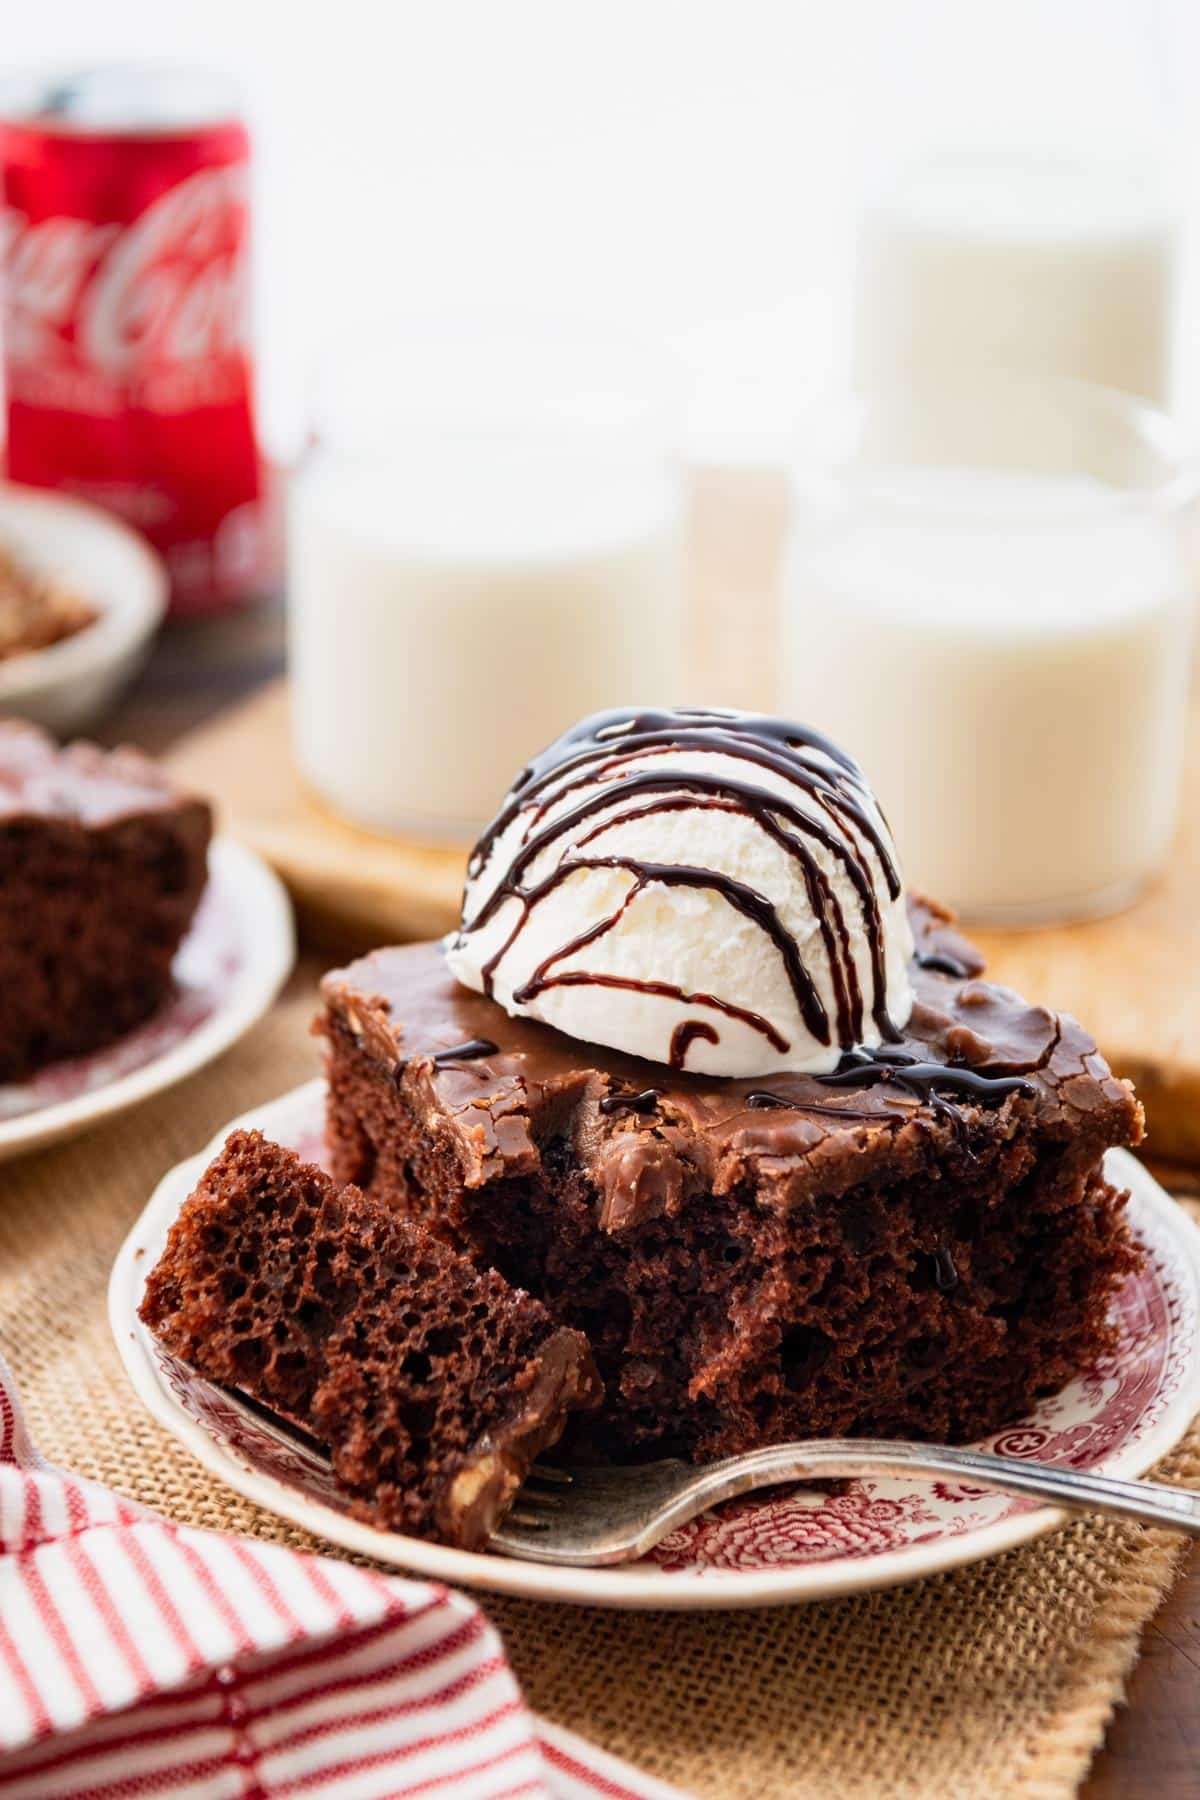 Side shot of southern coca cola chocolate cake on a plate with milk in the background.